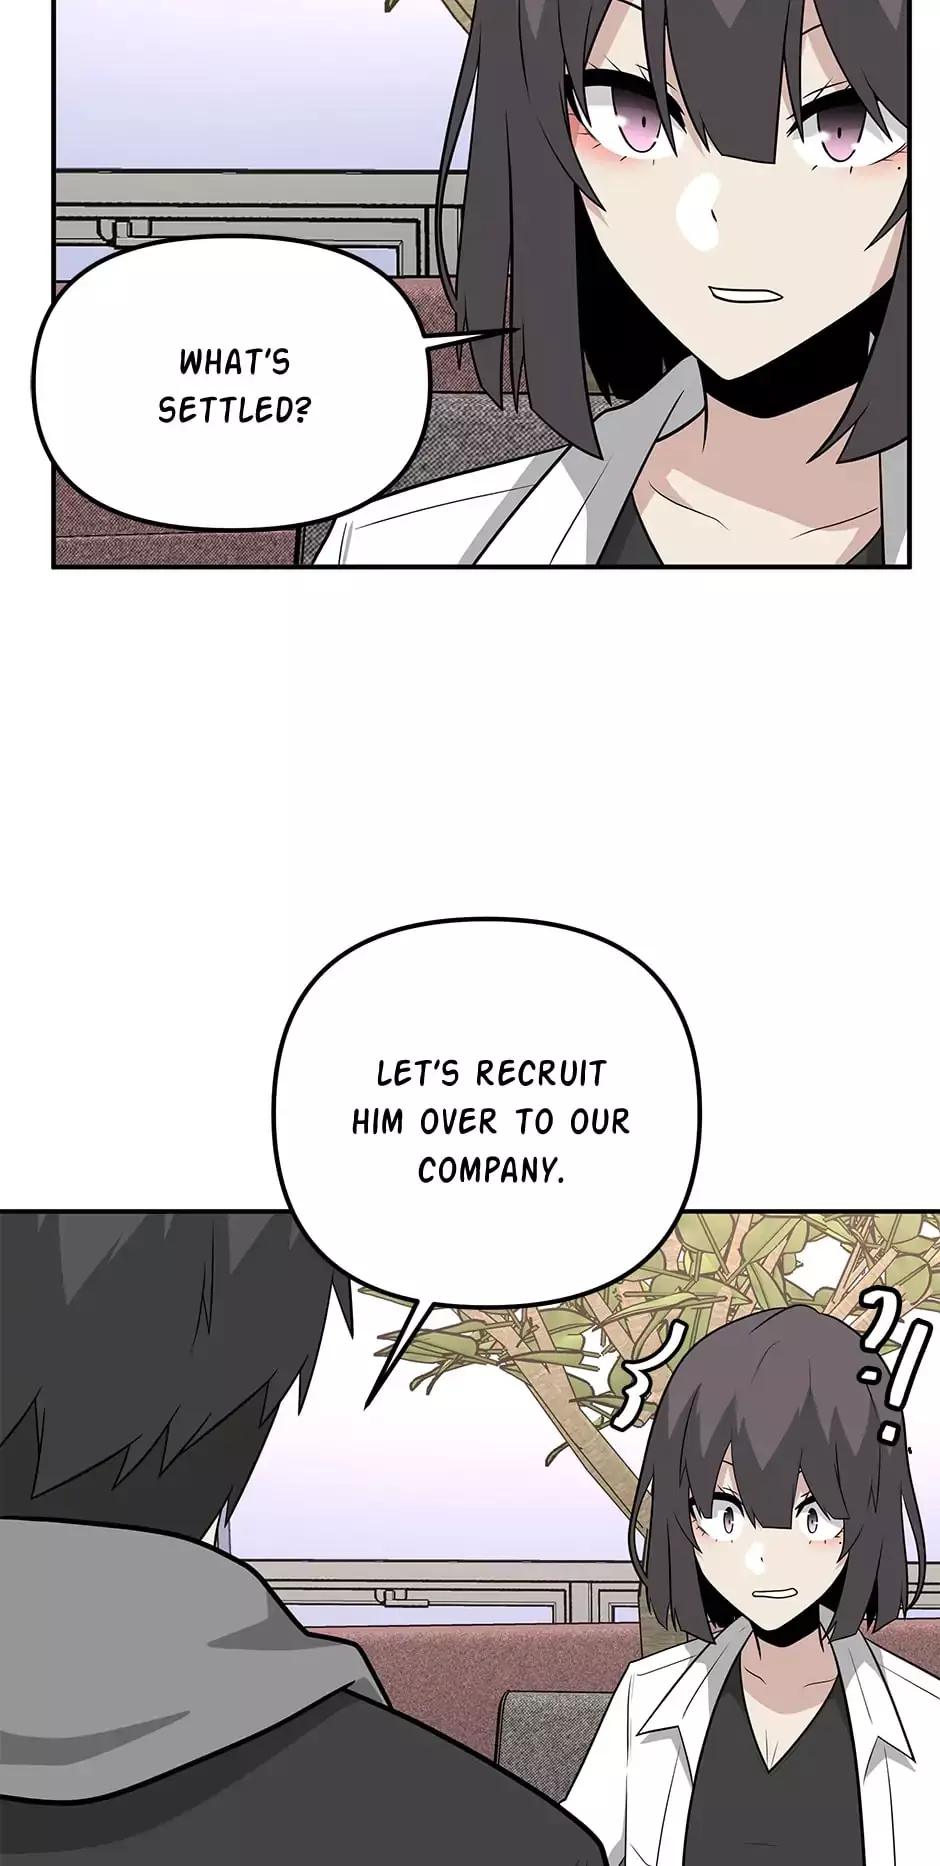 Where Are You Looking, Manager? - 68 page 46-922d3dd3